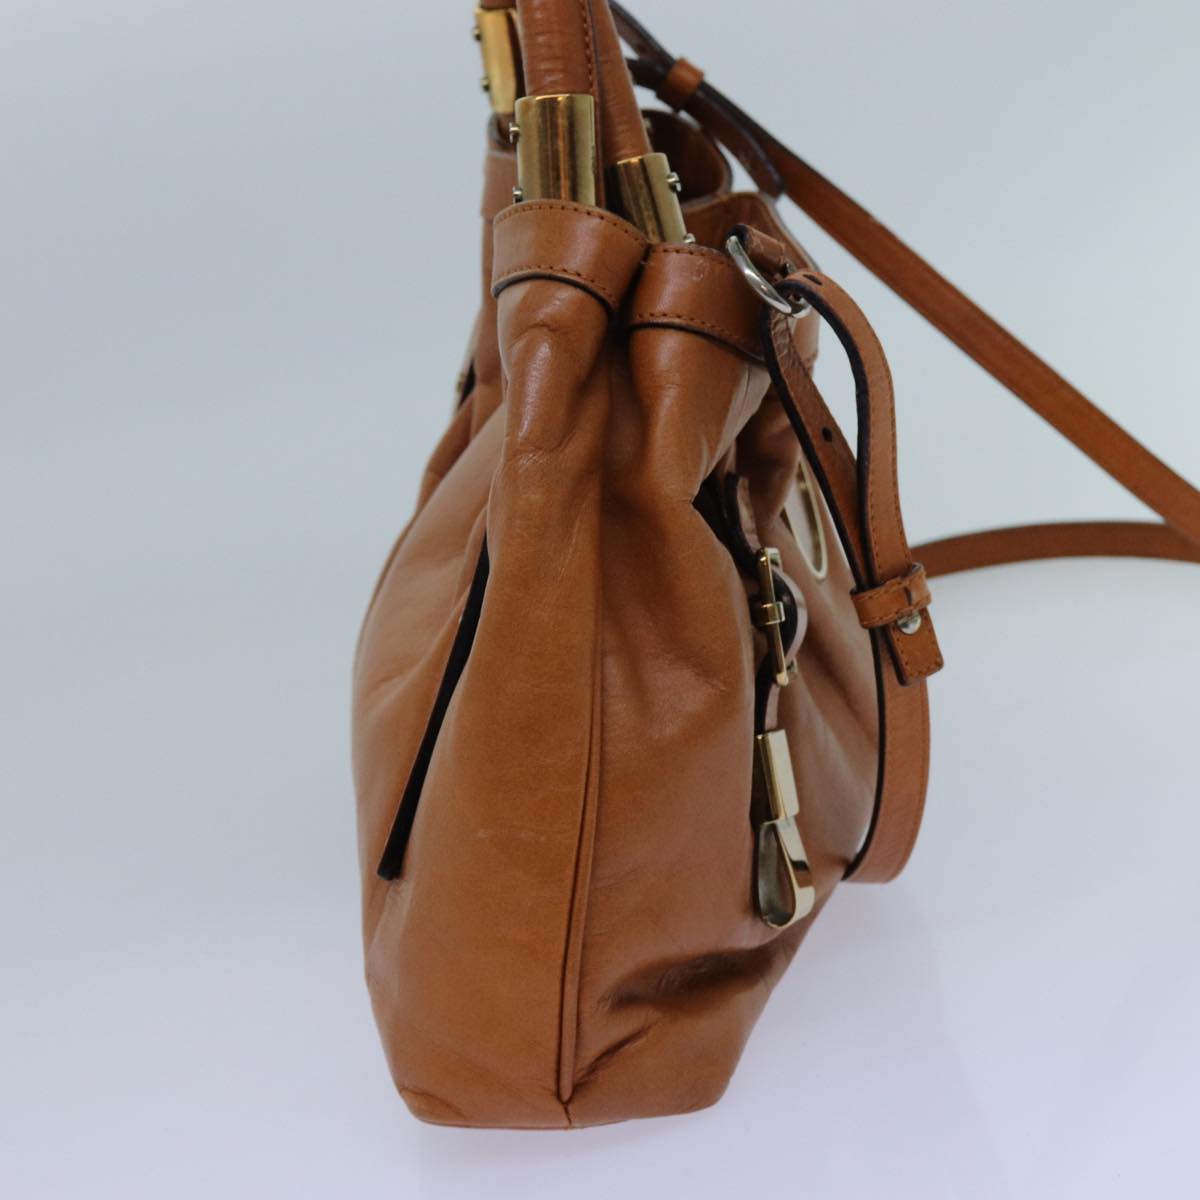 Chloe Victoria Hand Bag Leather 2way Brown Auth yk11966